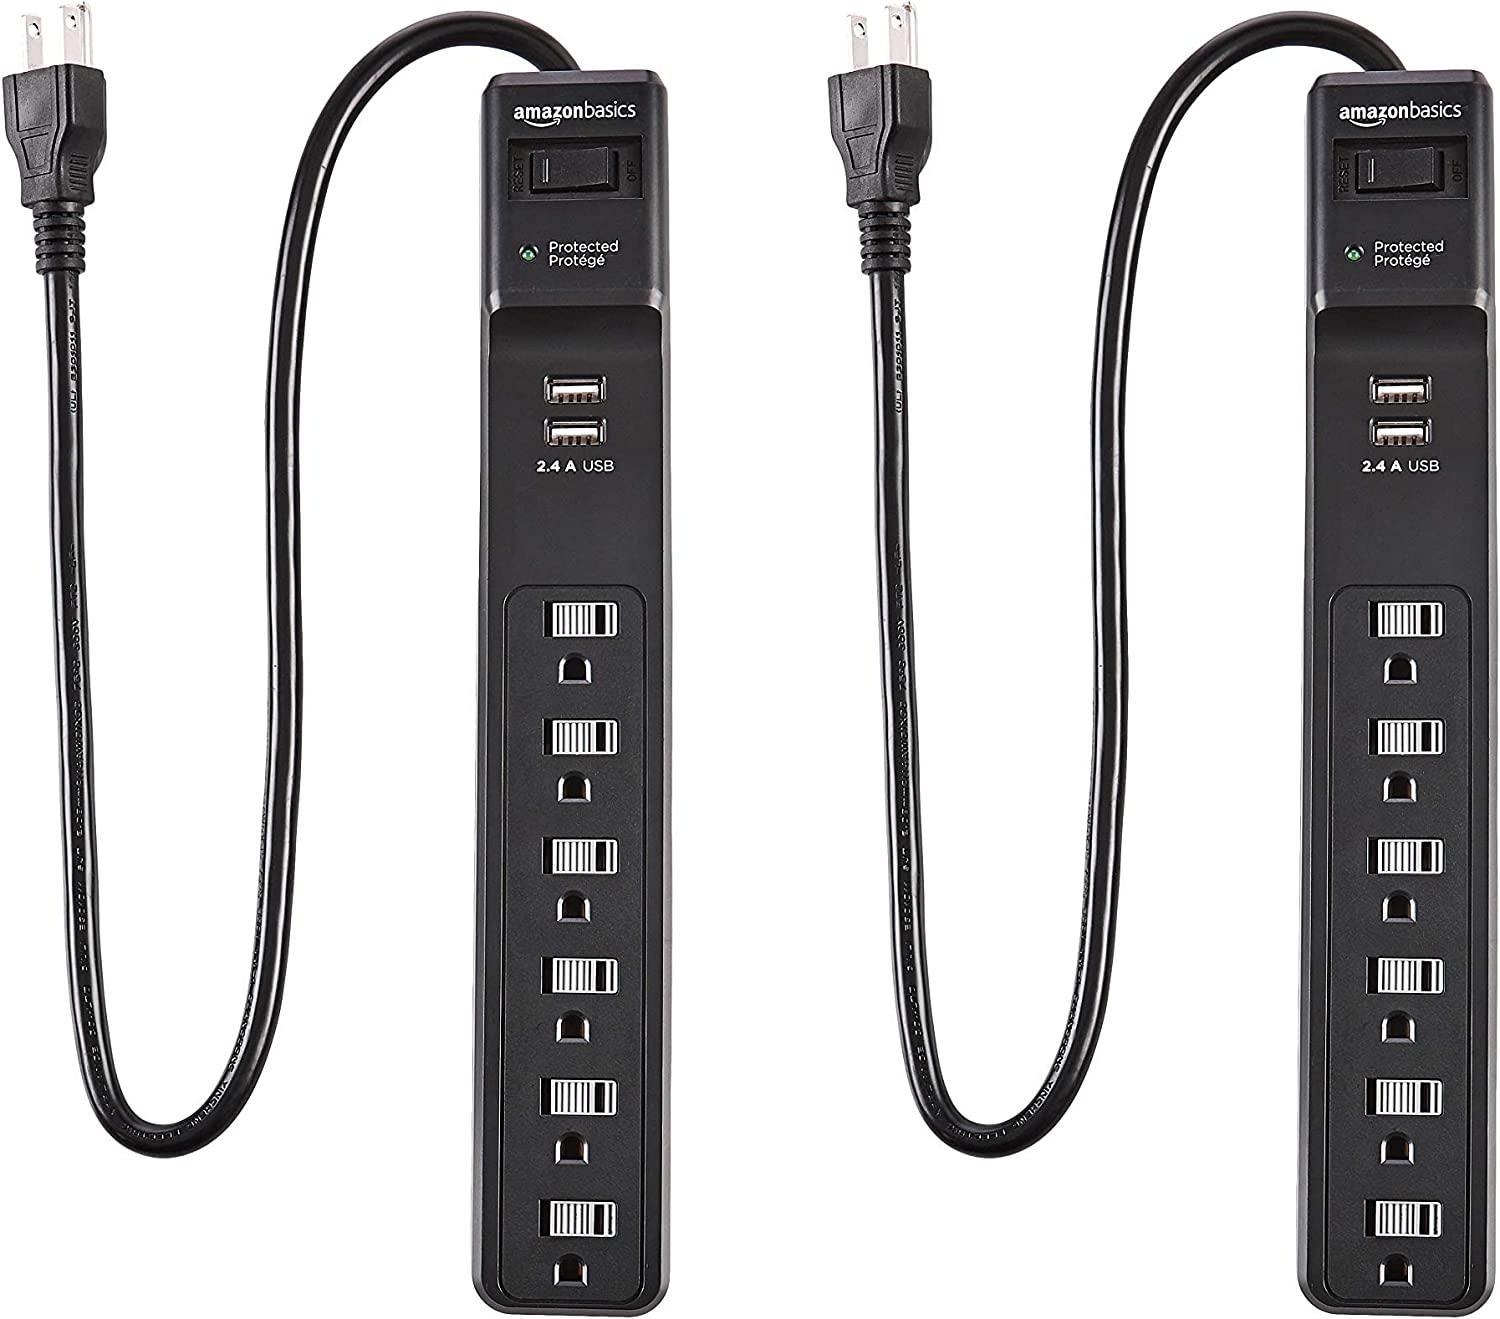 Amazon Basics 6-Outlet Surge Protector Power Strip 2 Pack for $8.54